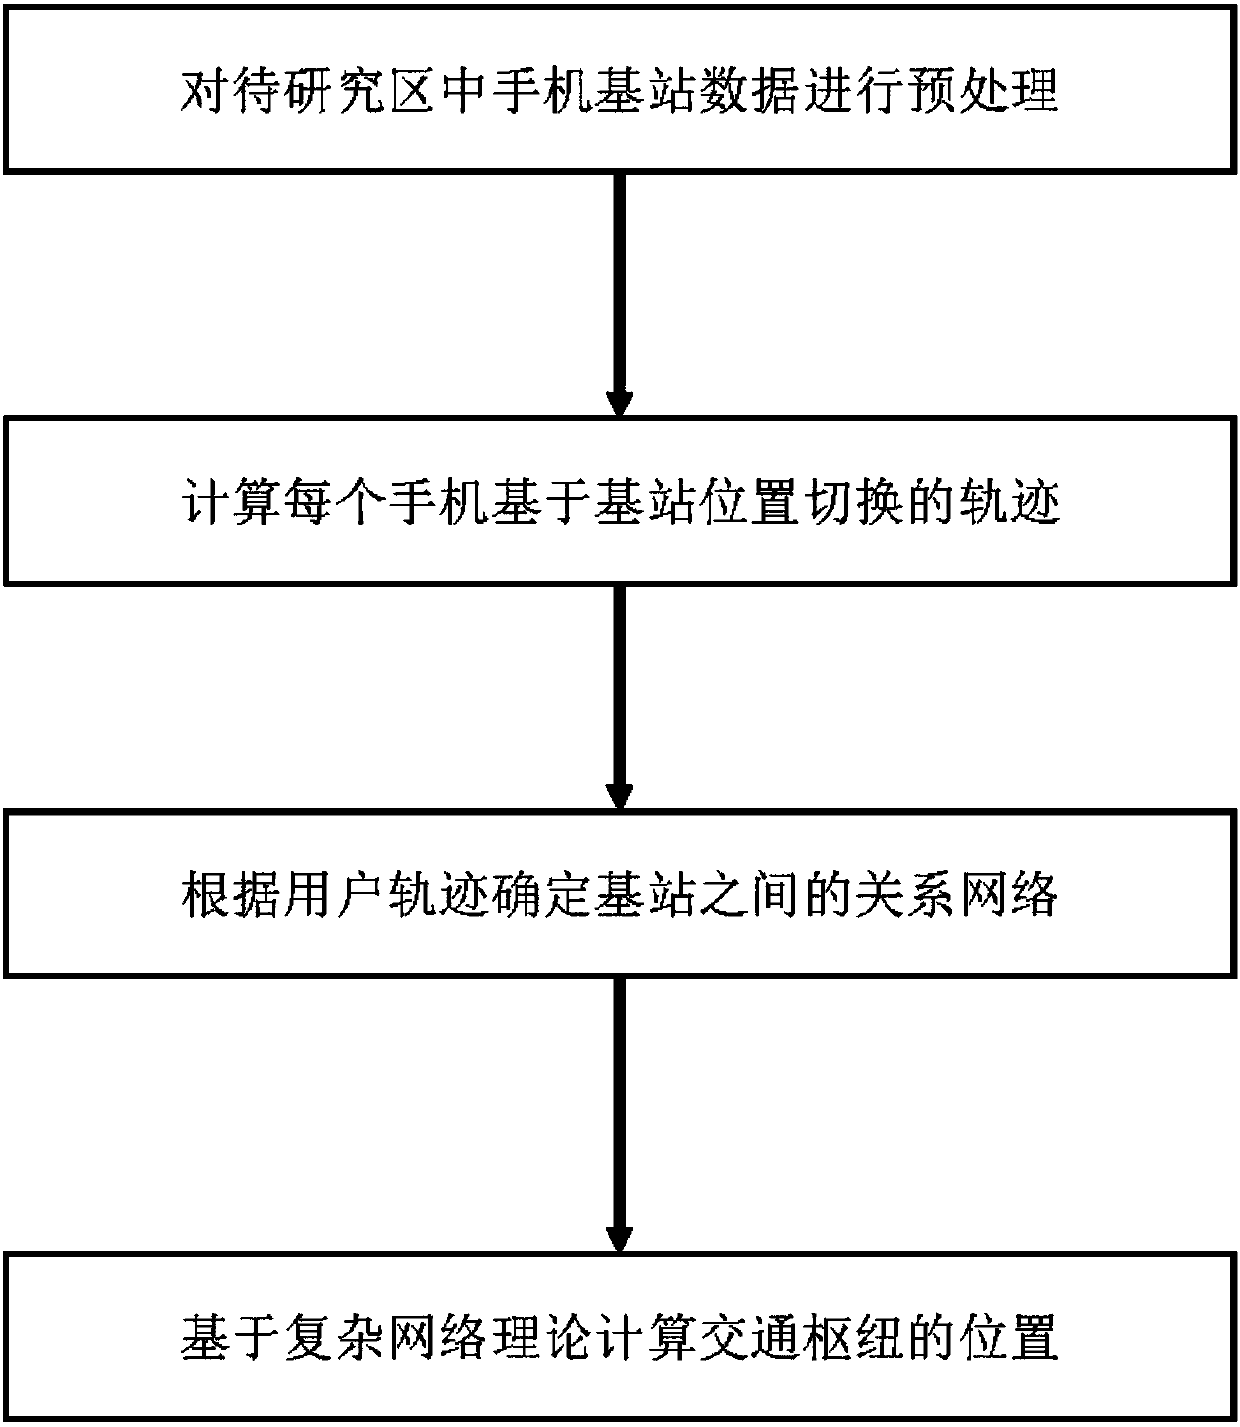 Complex network and mobile phone signaling data-based urban transportation junction point evaluation method